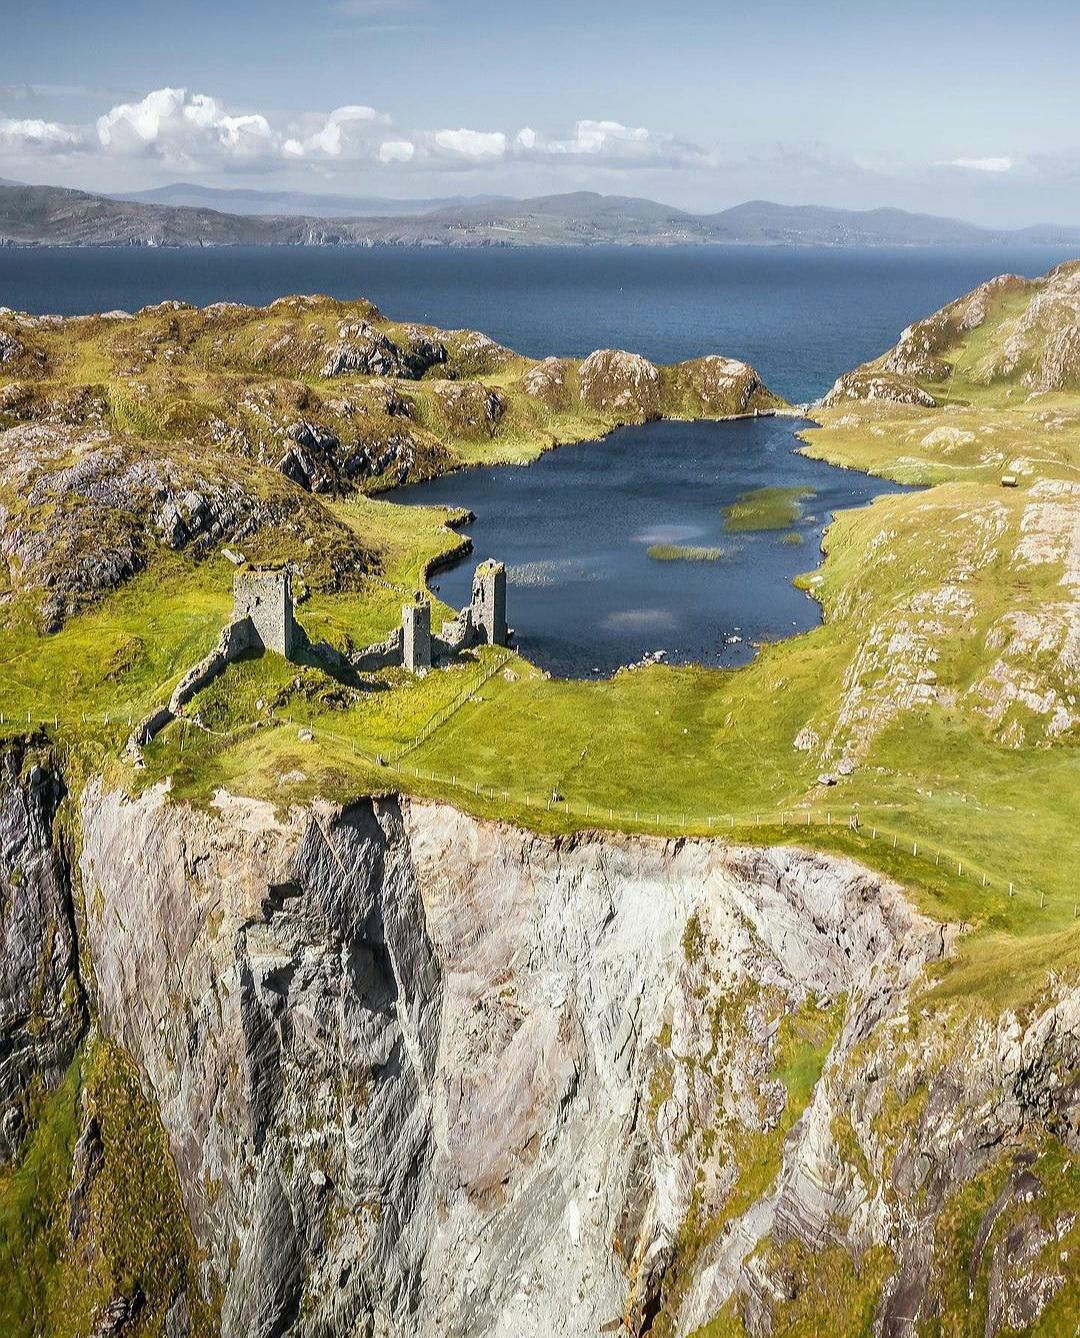 The ruins of Dunlough Castle at the edge of 100 meter cliffs on the northern tip of the Mizen Peninsula, County Cork, Ireland. Built in 1207 by the O'Mahony Clan.